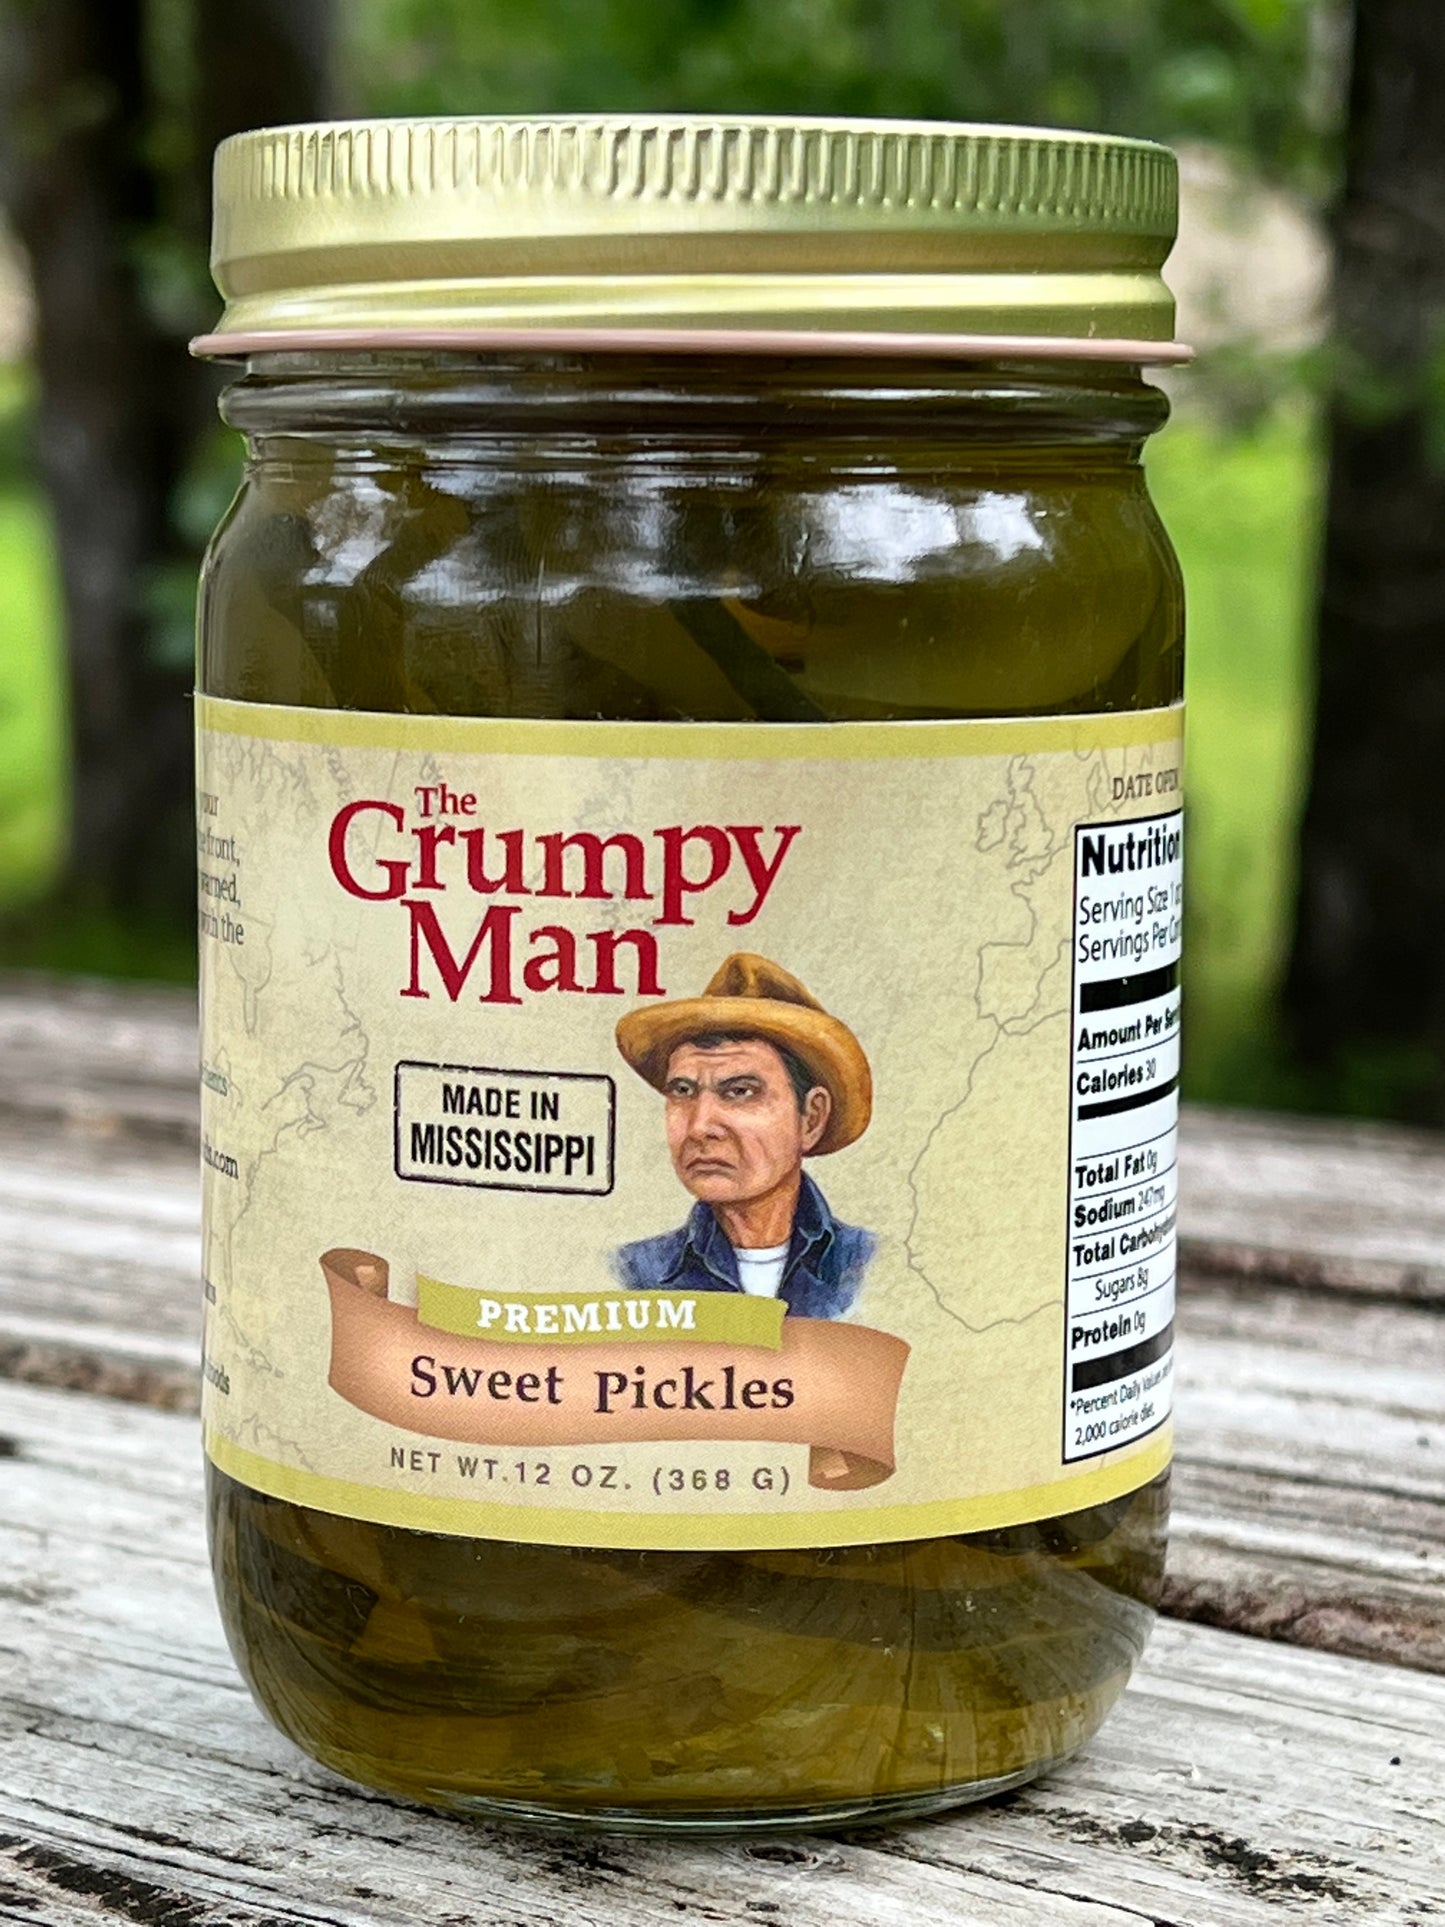 sweet pickles, made slow, made to love